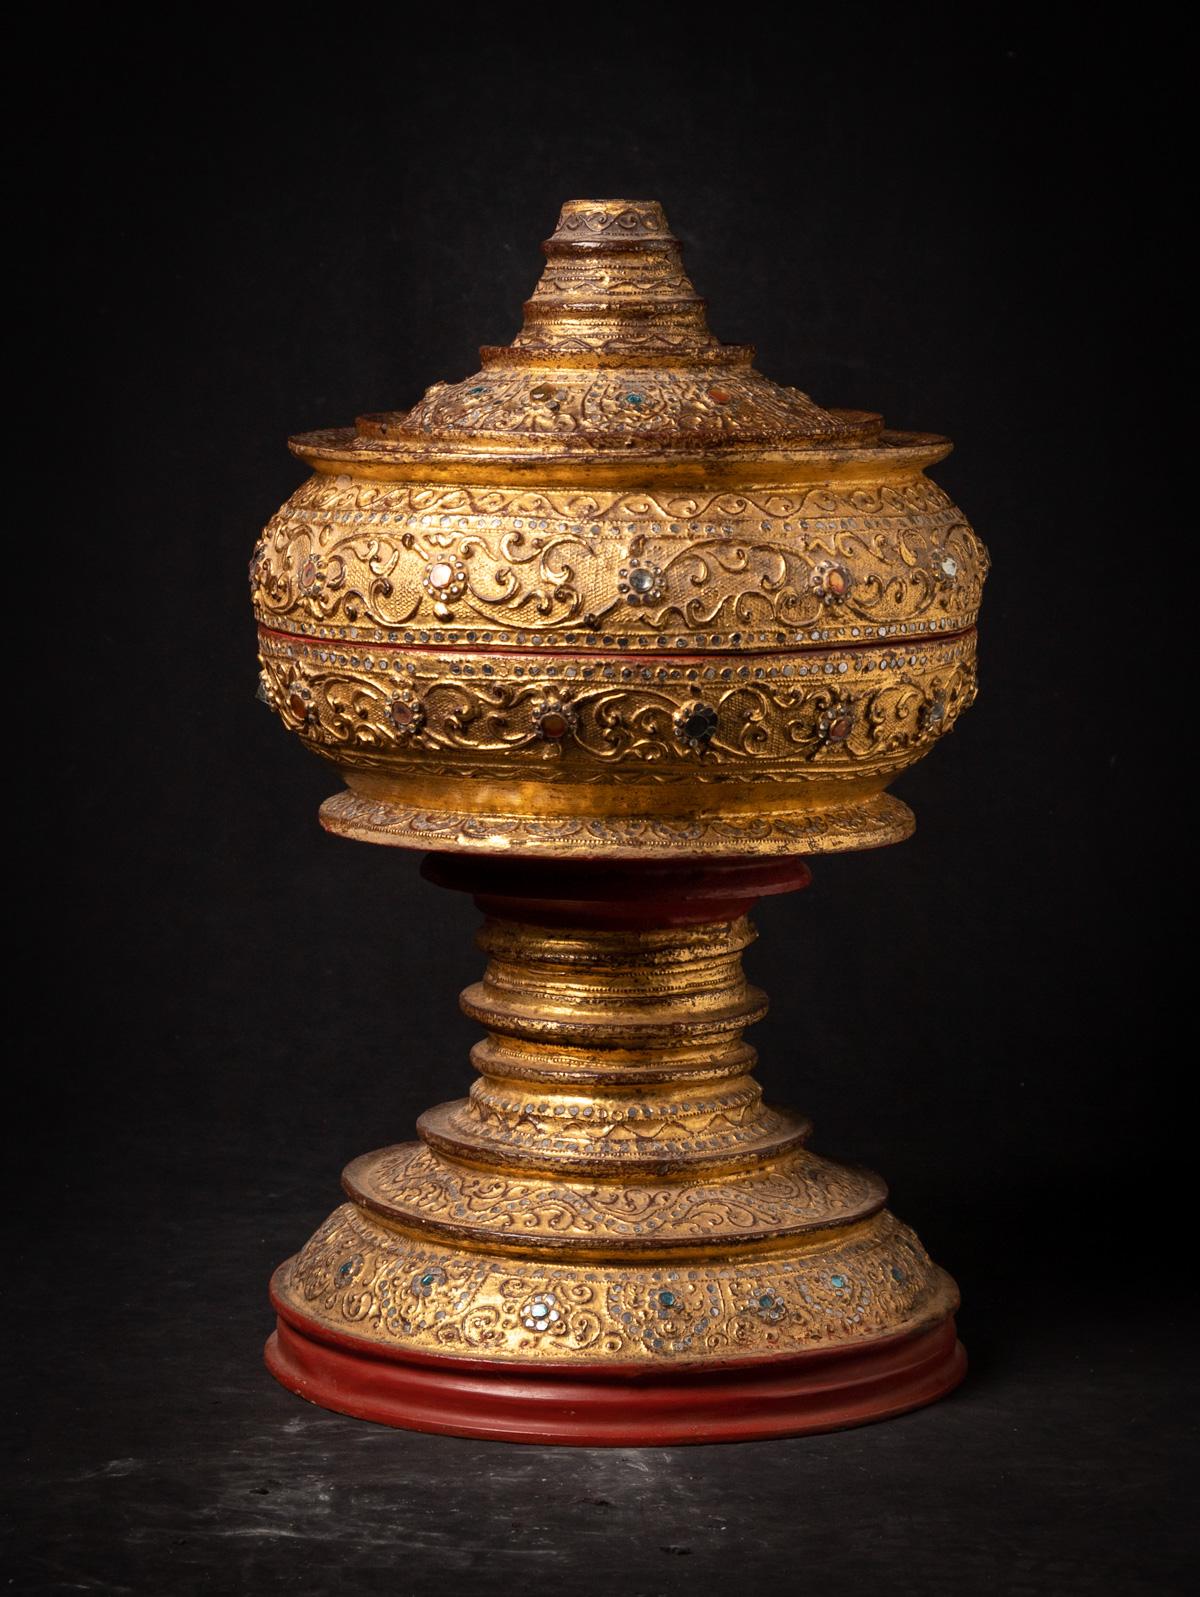 Material : lacquerware
79 cm high
35 cm diameter
Gilded with 24 krt. gold
Mandalay style
19th century
With original Hintha bird on top
Weight: 3,55 kgs
Originating from Burma
Nr: 3664-37